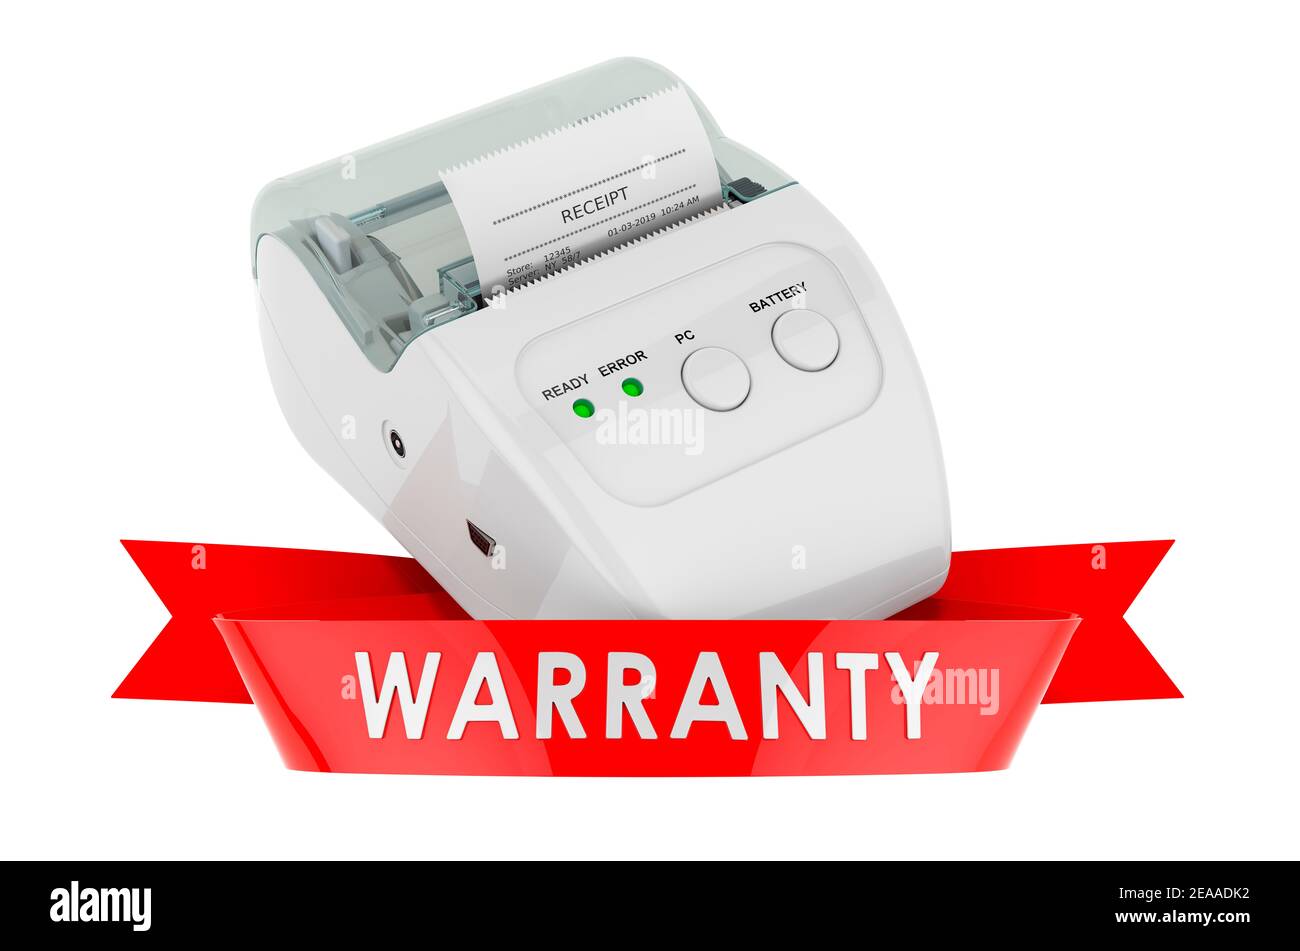 Receipt printer warranty concept. 3D rendering isolated on white background Stock Photo